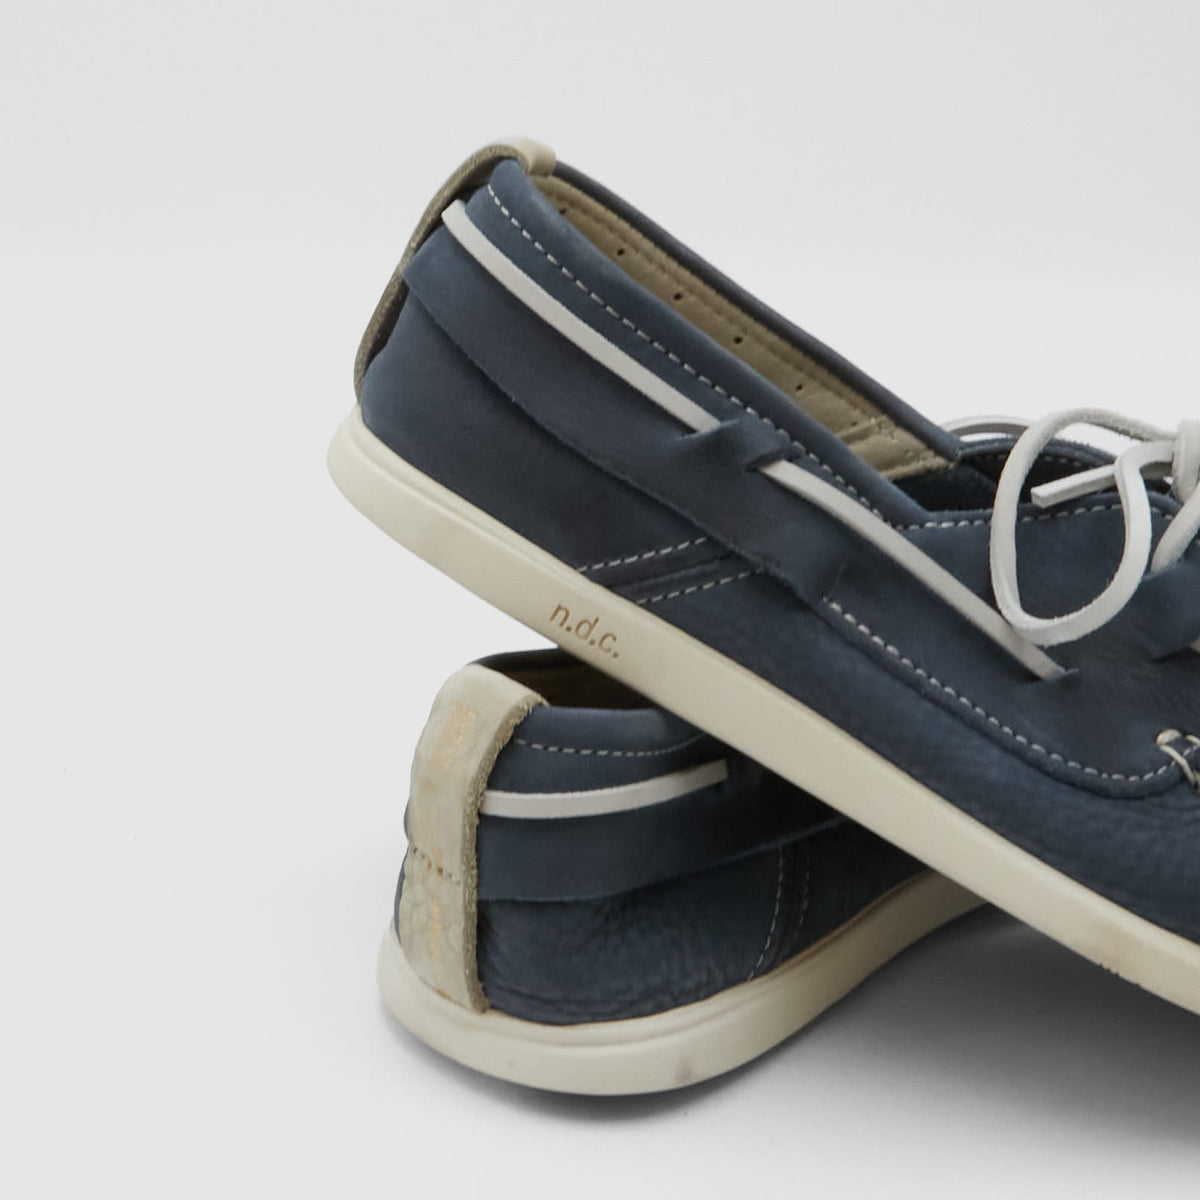 n.d.c. made by hand Alithia Vintage Wash Boat Shoes